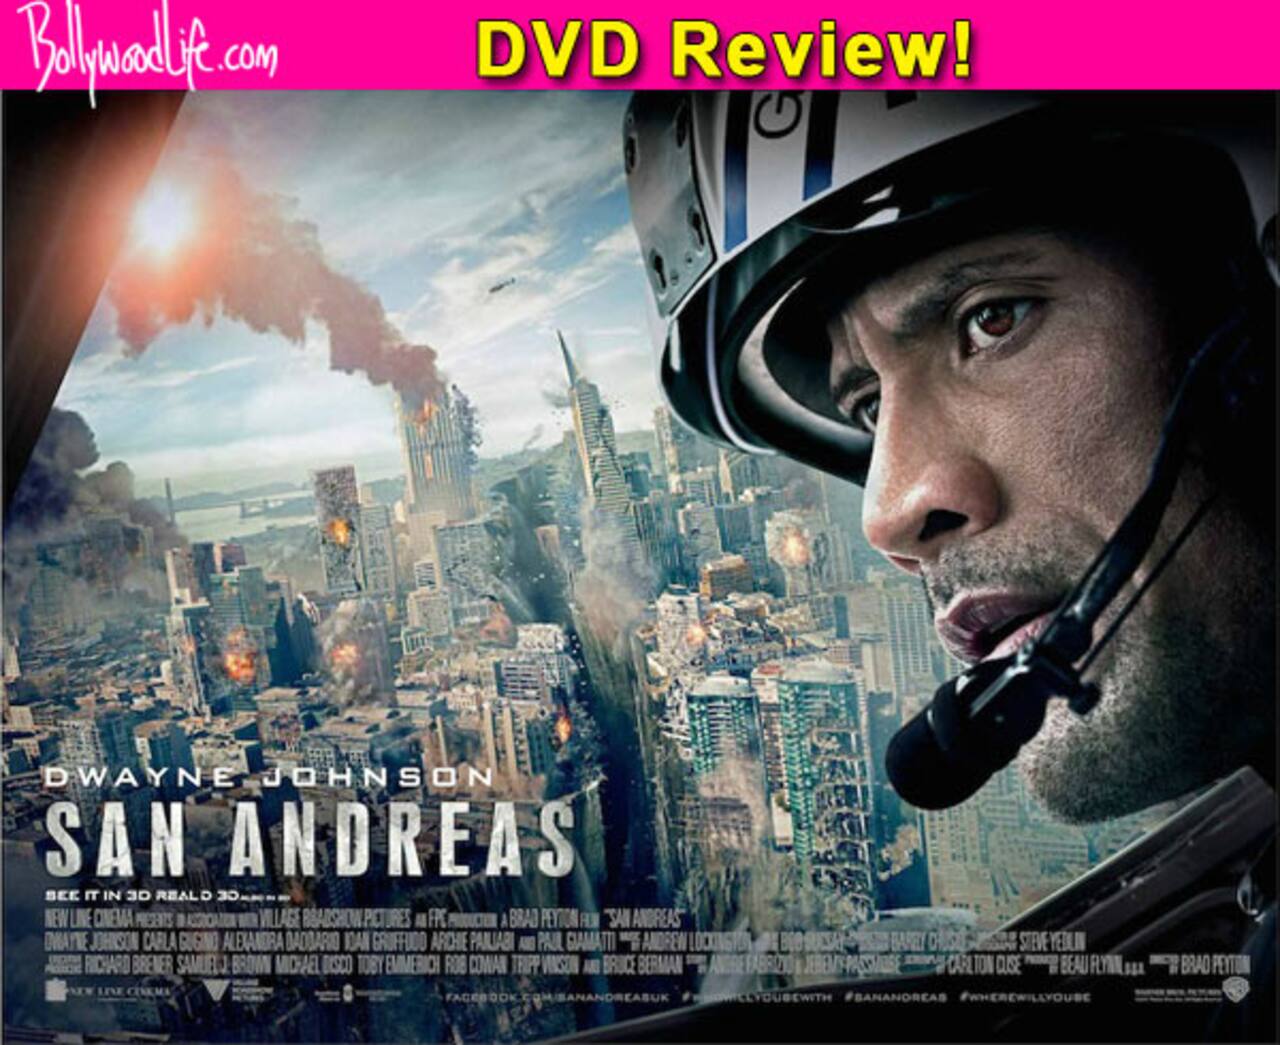 DVD of the Week - San Andreas (Blu-ray)!